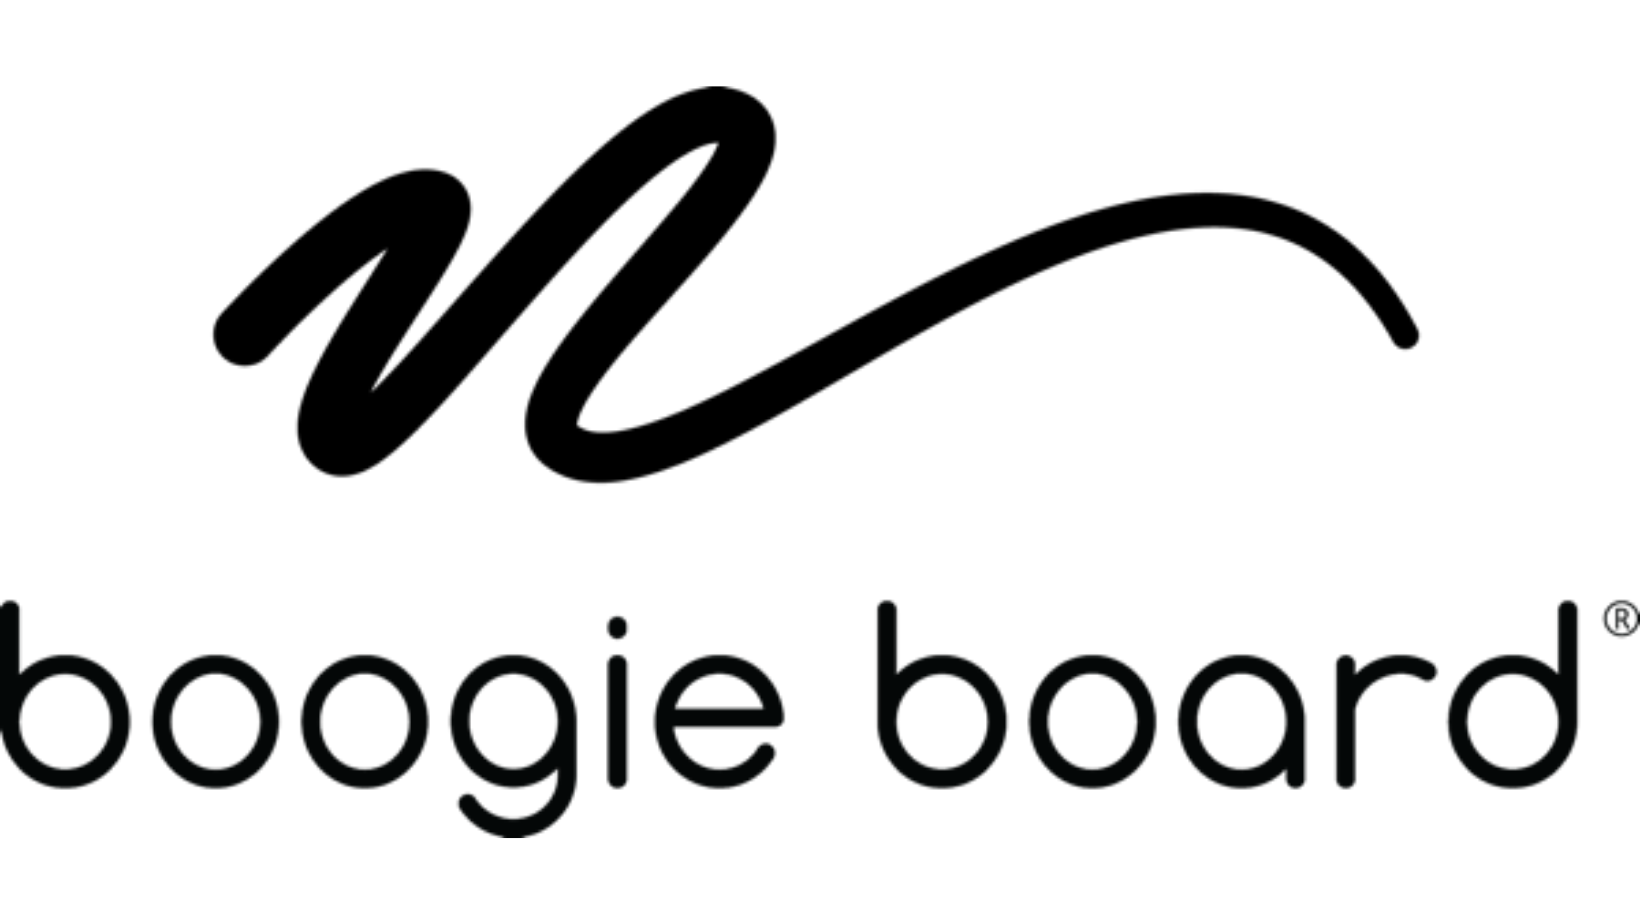 Boogie Board™ - Play n' Trace™ Adventure Activity Templates